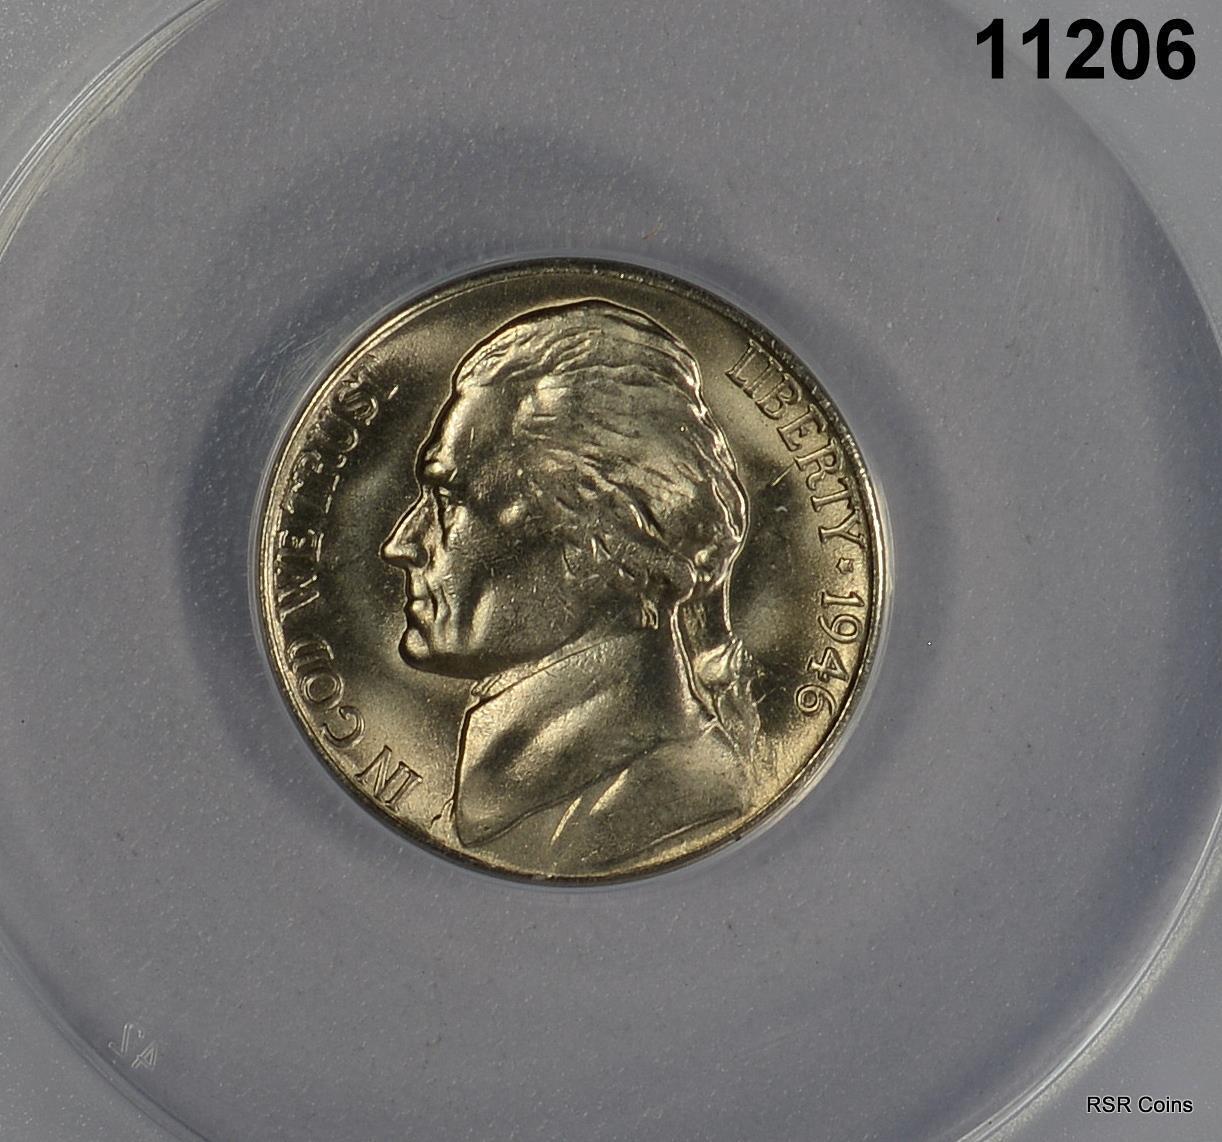 1946 S JEFFERSON NICKEL ANACS CERTIFIED MS66 FLASHY PL SURFACES! #11206